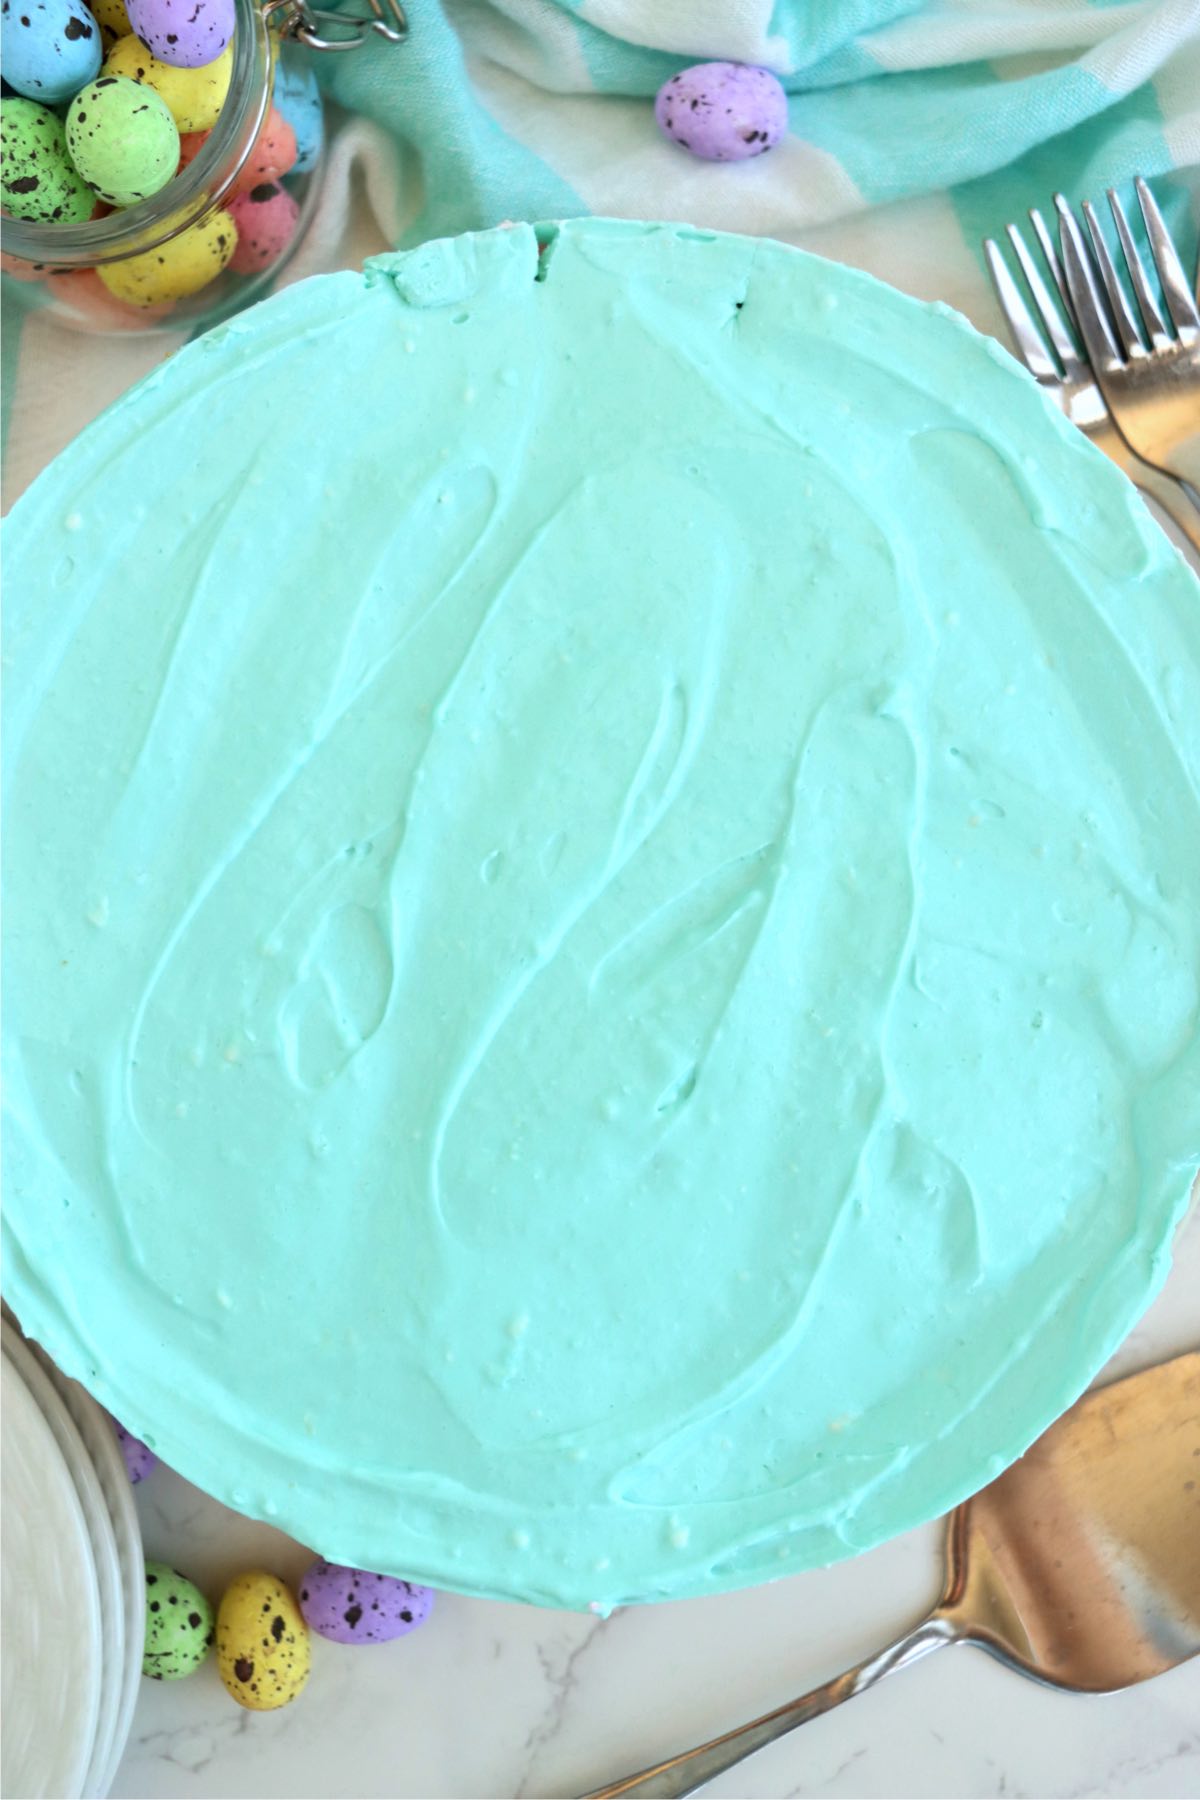 Top blue layer of no-bake Easter cheesecake